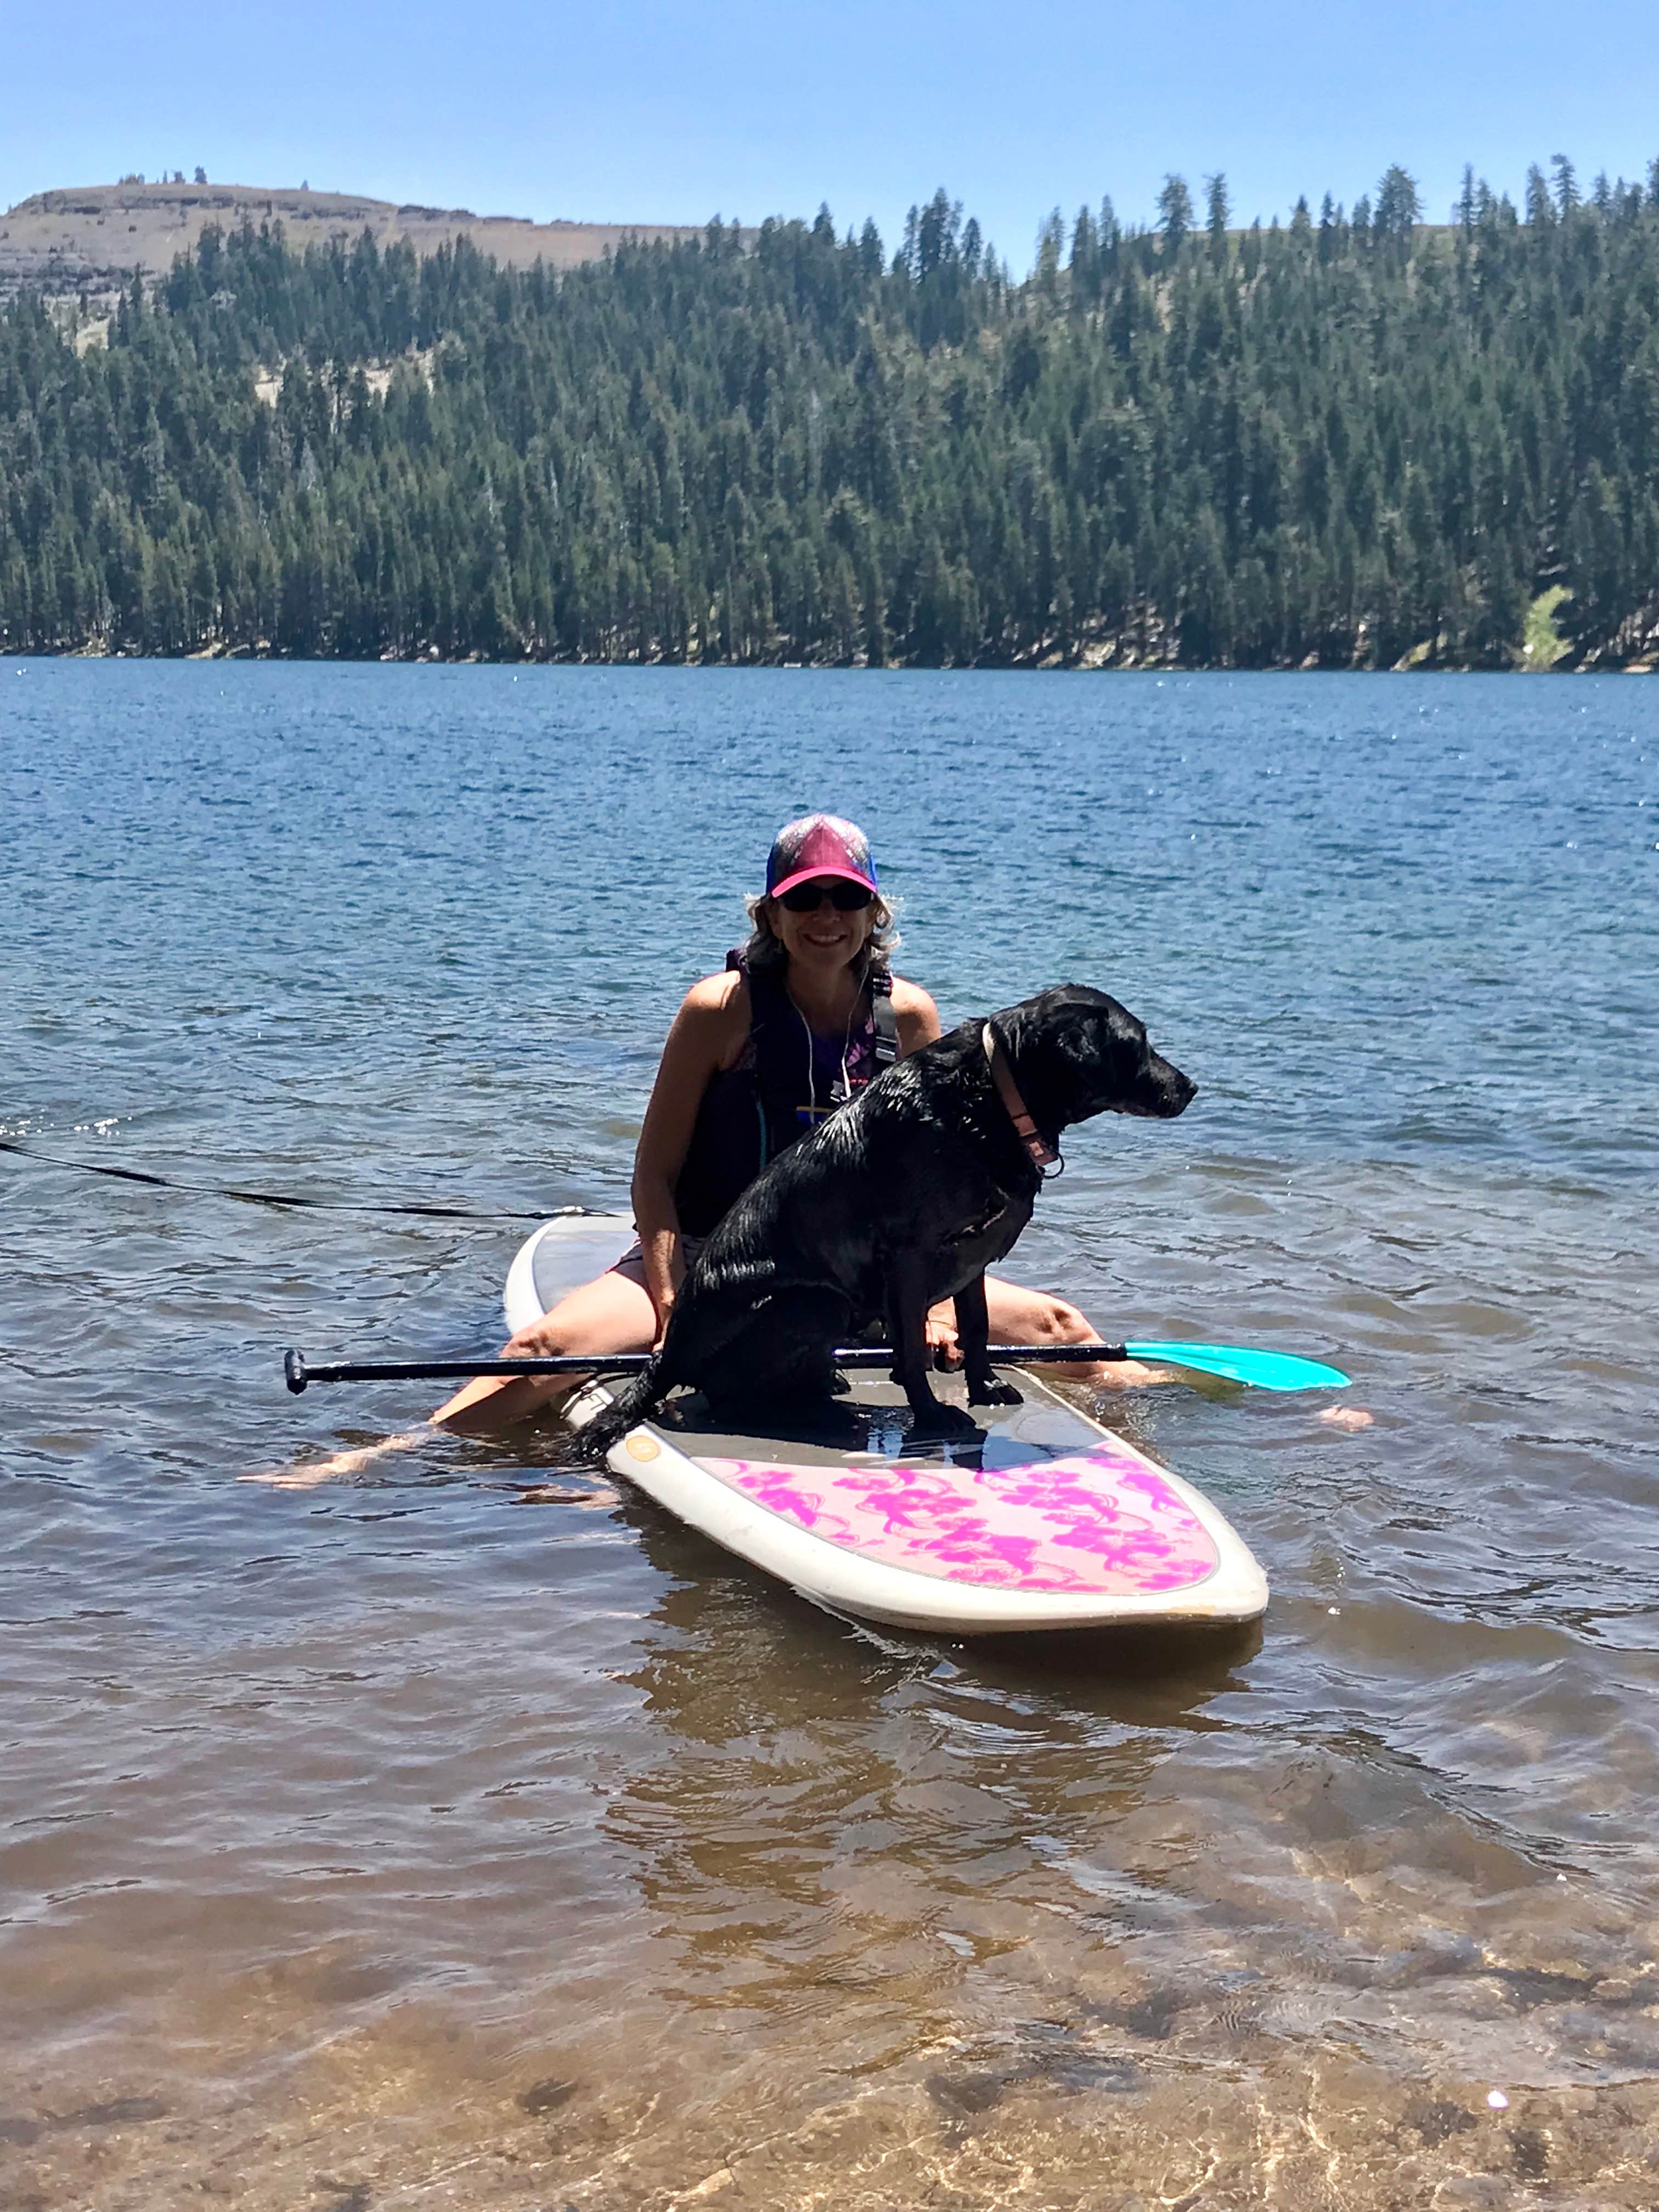 are dogs allowed at lake alpine campground